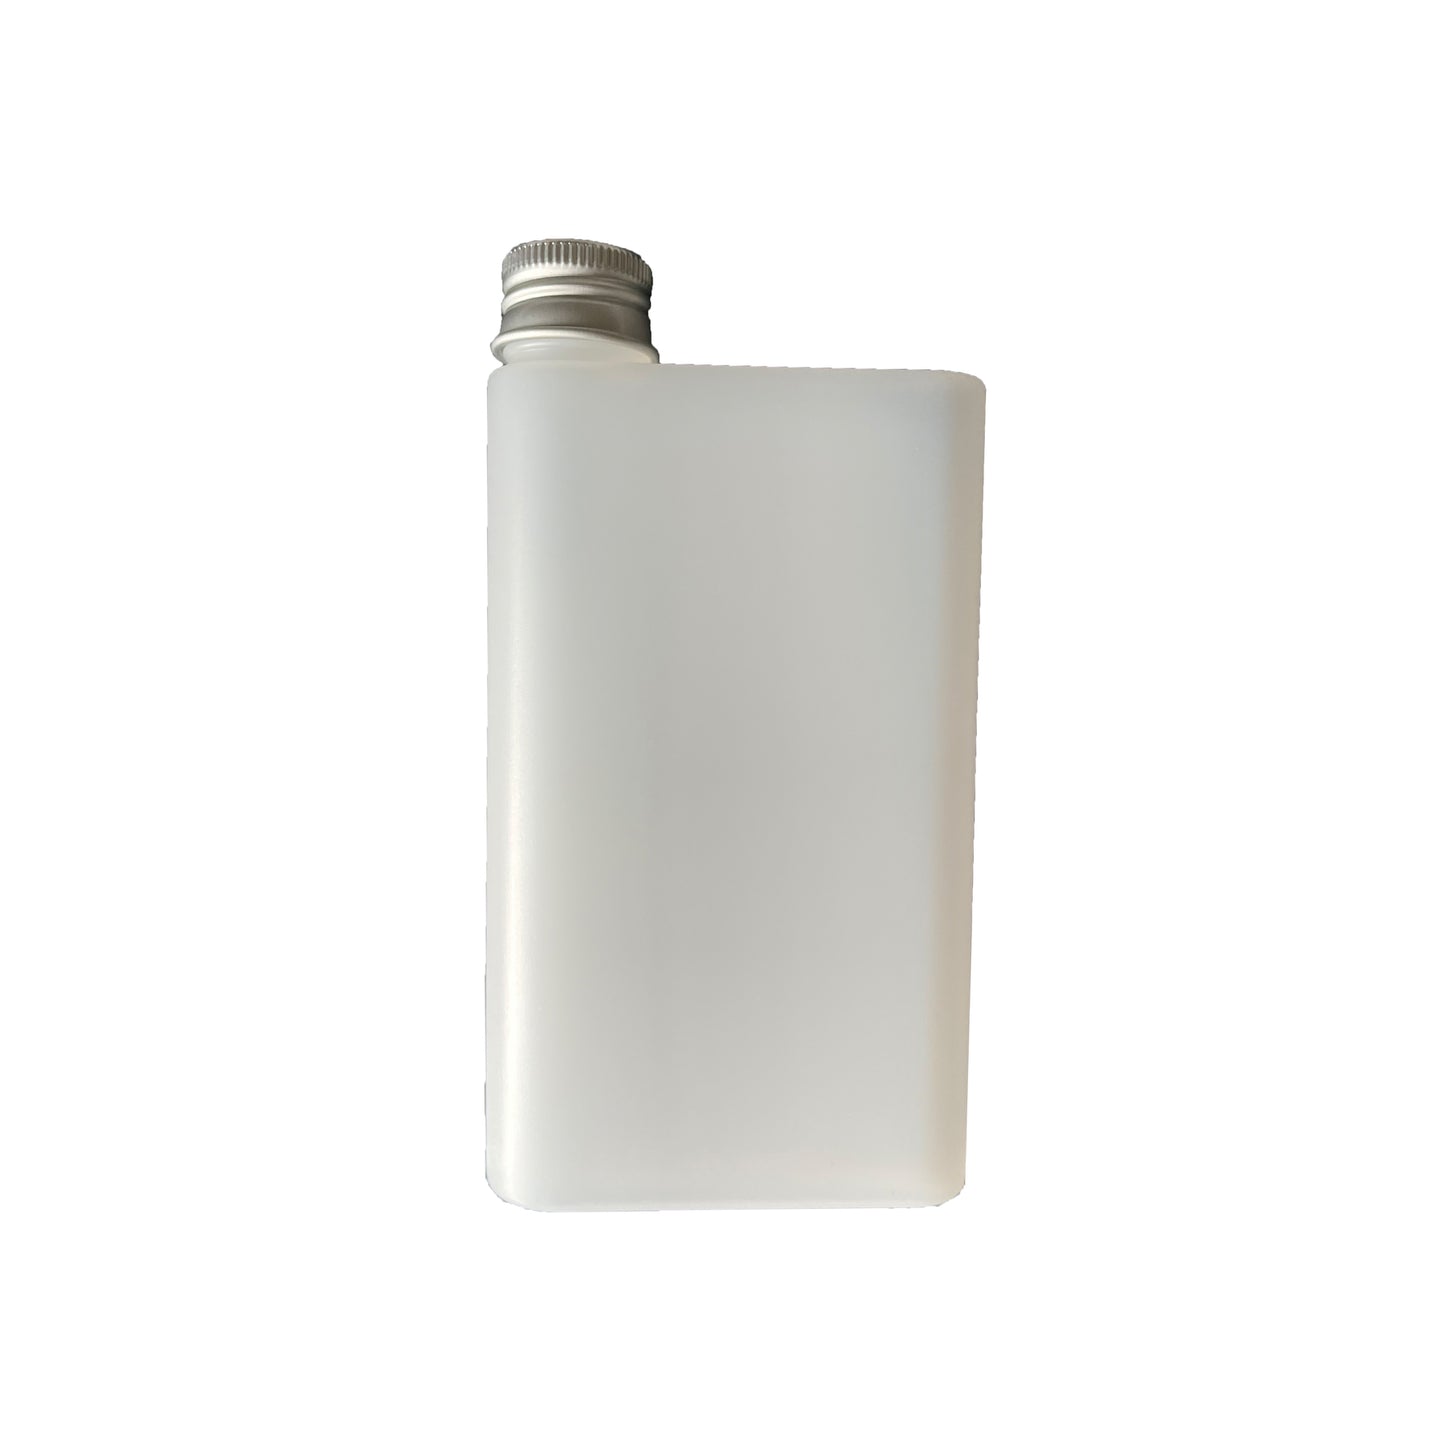 7 oz. Semi-Translucent, HDPE, Flask Bottle with Lid, 3.25" L x 1" W x 5.25" H (6" H with Lid), 96 pieces per Case, G.E.T. Cocktails To-Go